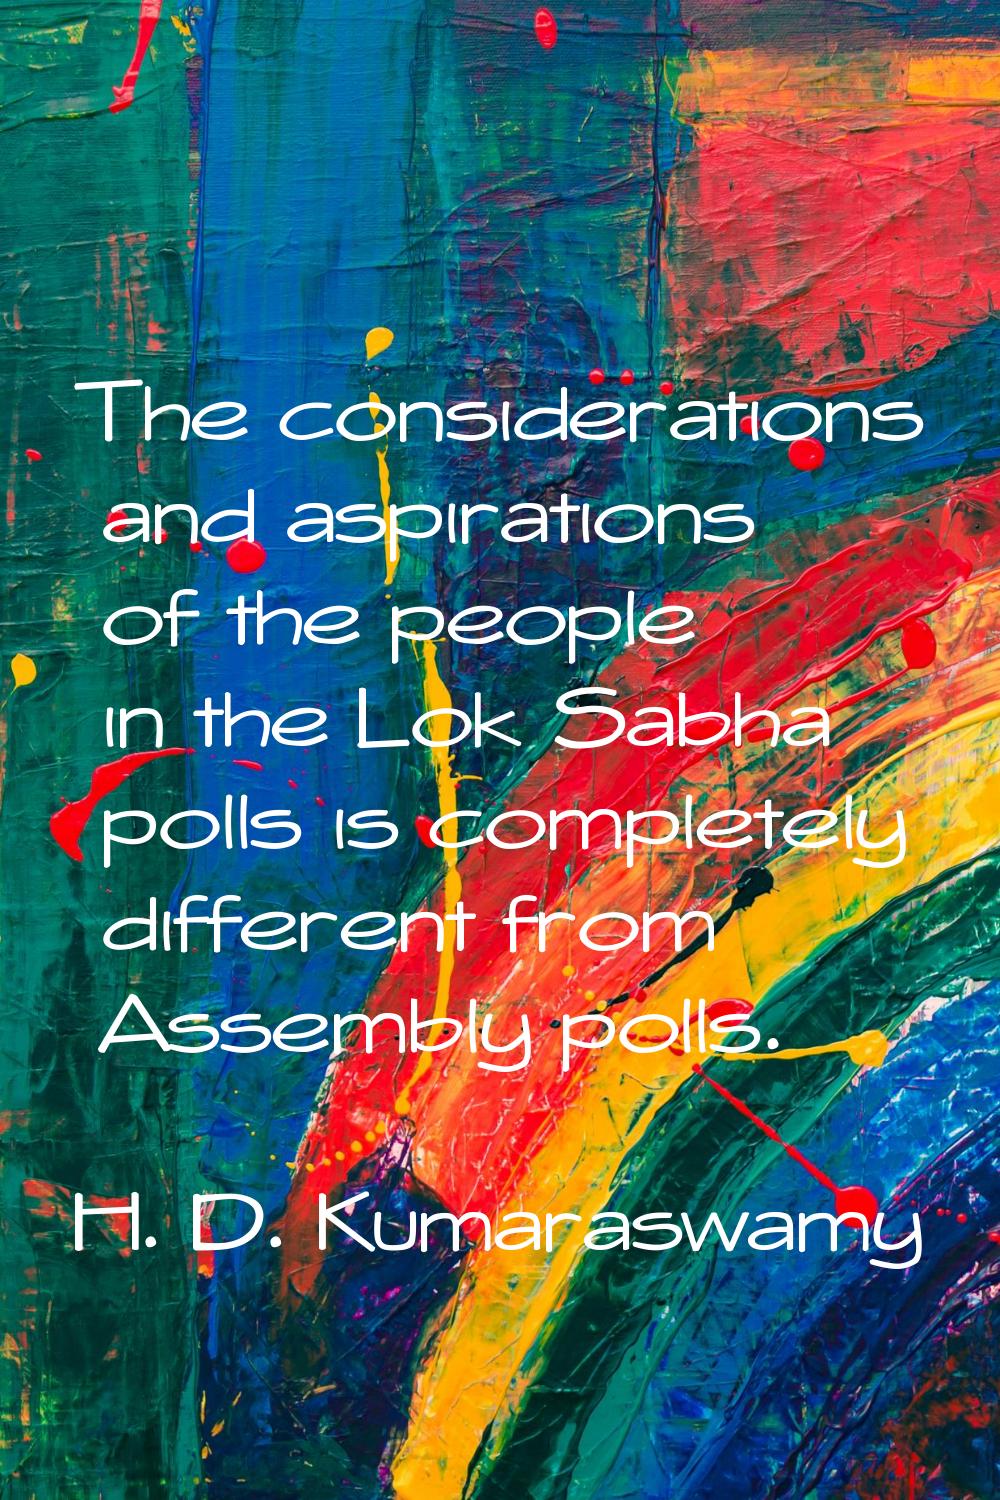 The considerations and aspirations of the people in the Lok Sabha polls is completely different fro